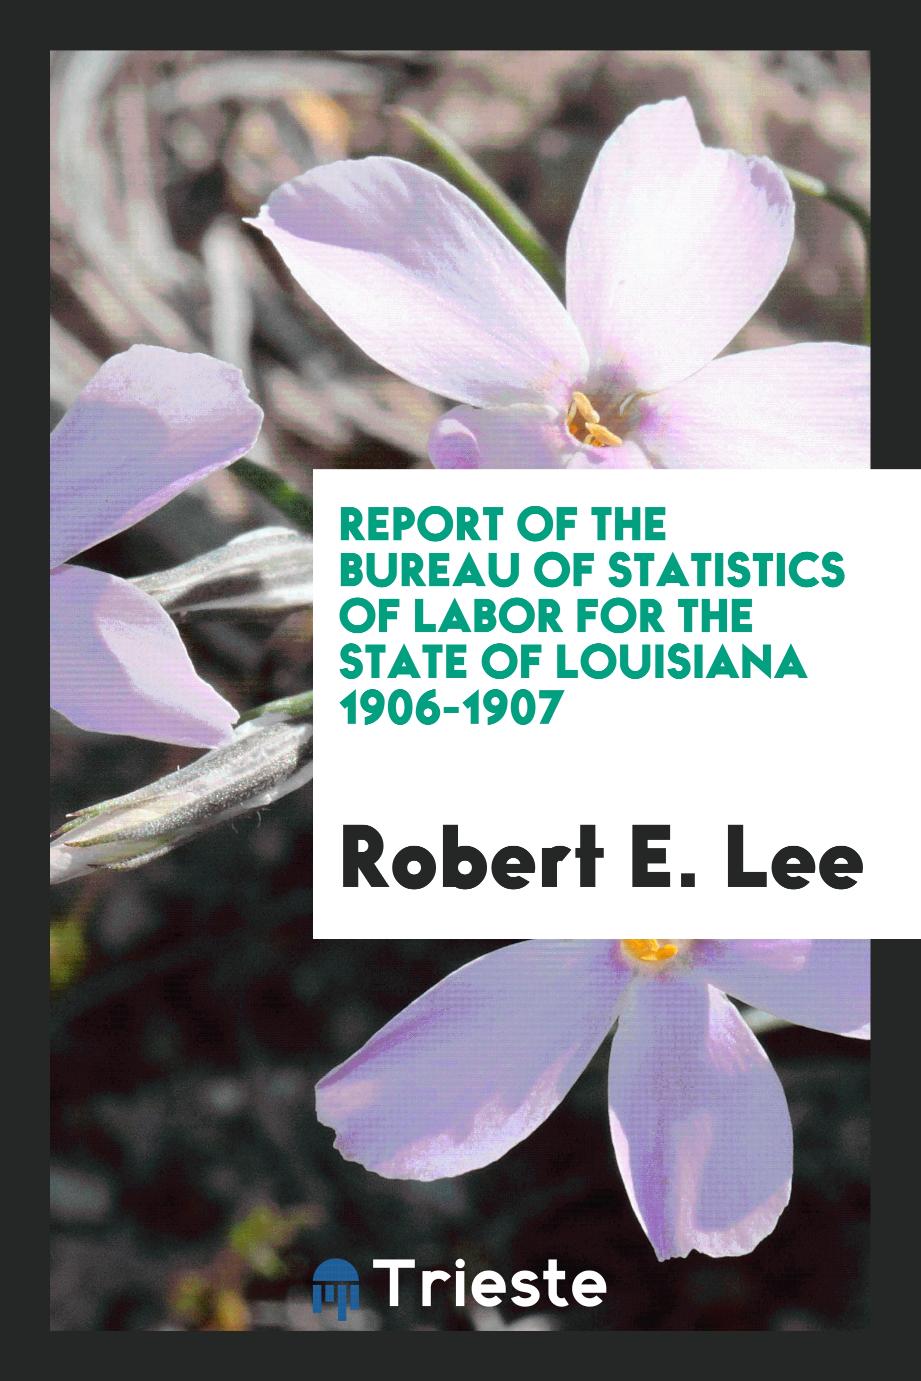 Report of the Bureau of Statistics of Labor for the State of Louisiana 1906-1907